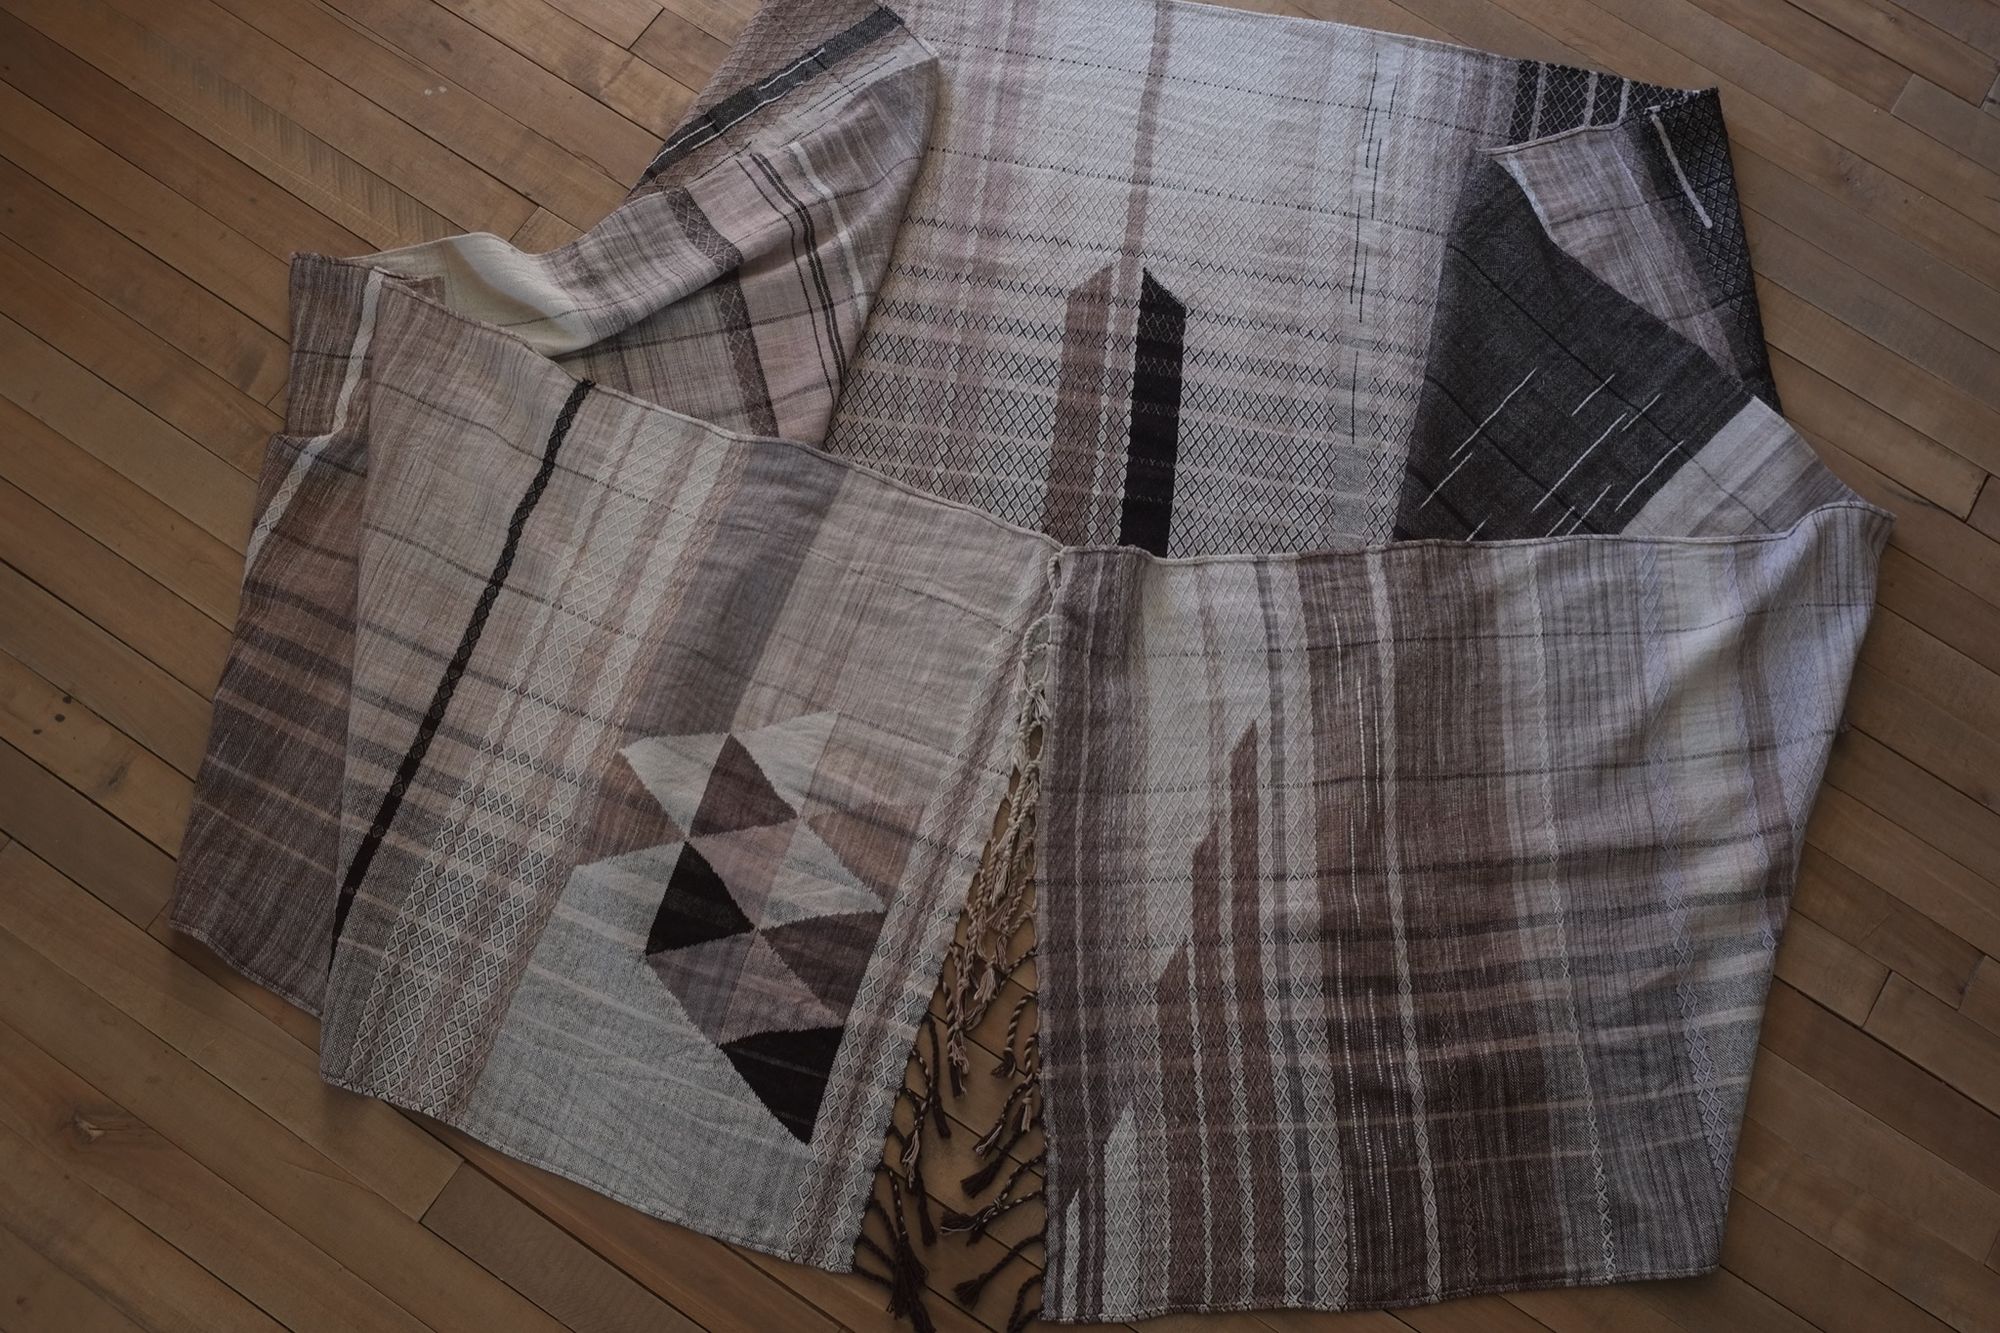 Detail of handwoven highly textured diamond pattern raw silk fabric in monochrome colors laying on a wooden floor